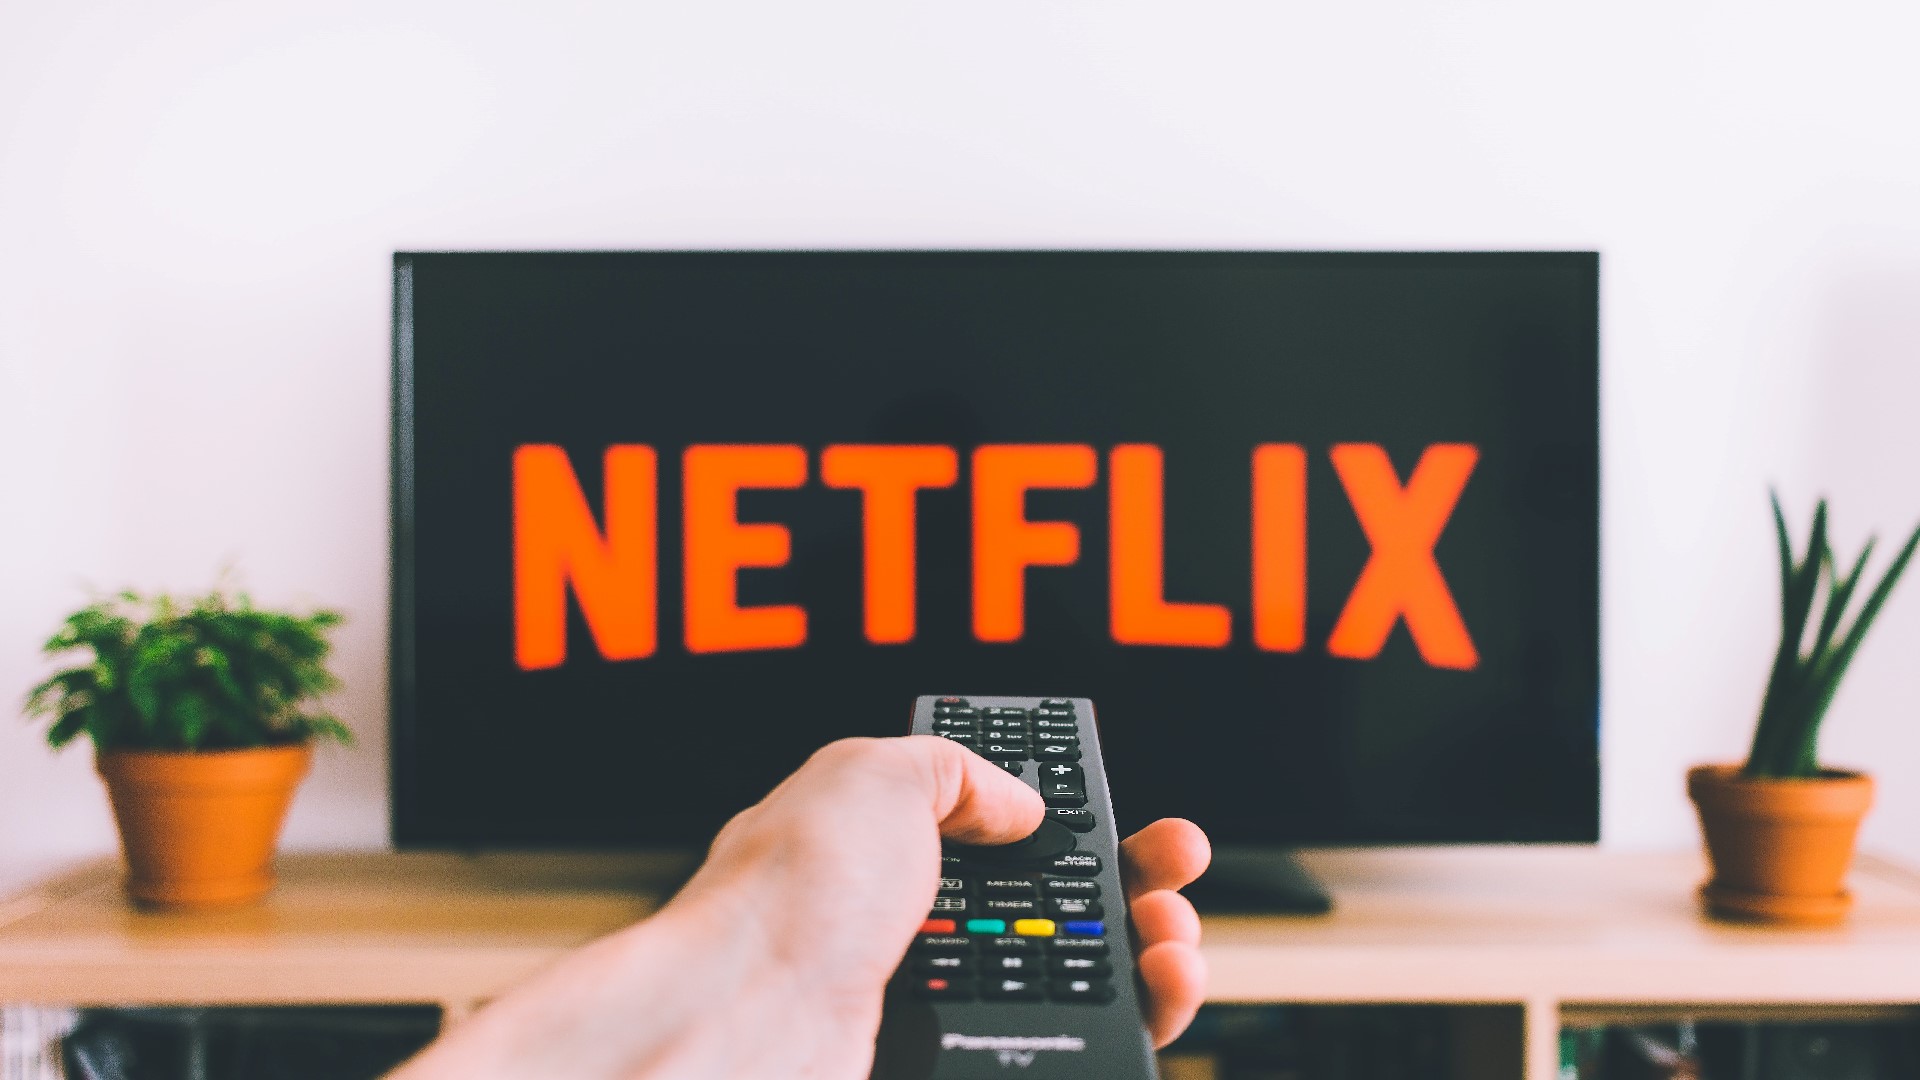 An image of a person holding a remote with Netflix in the background